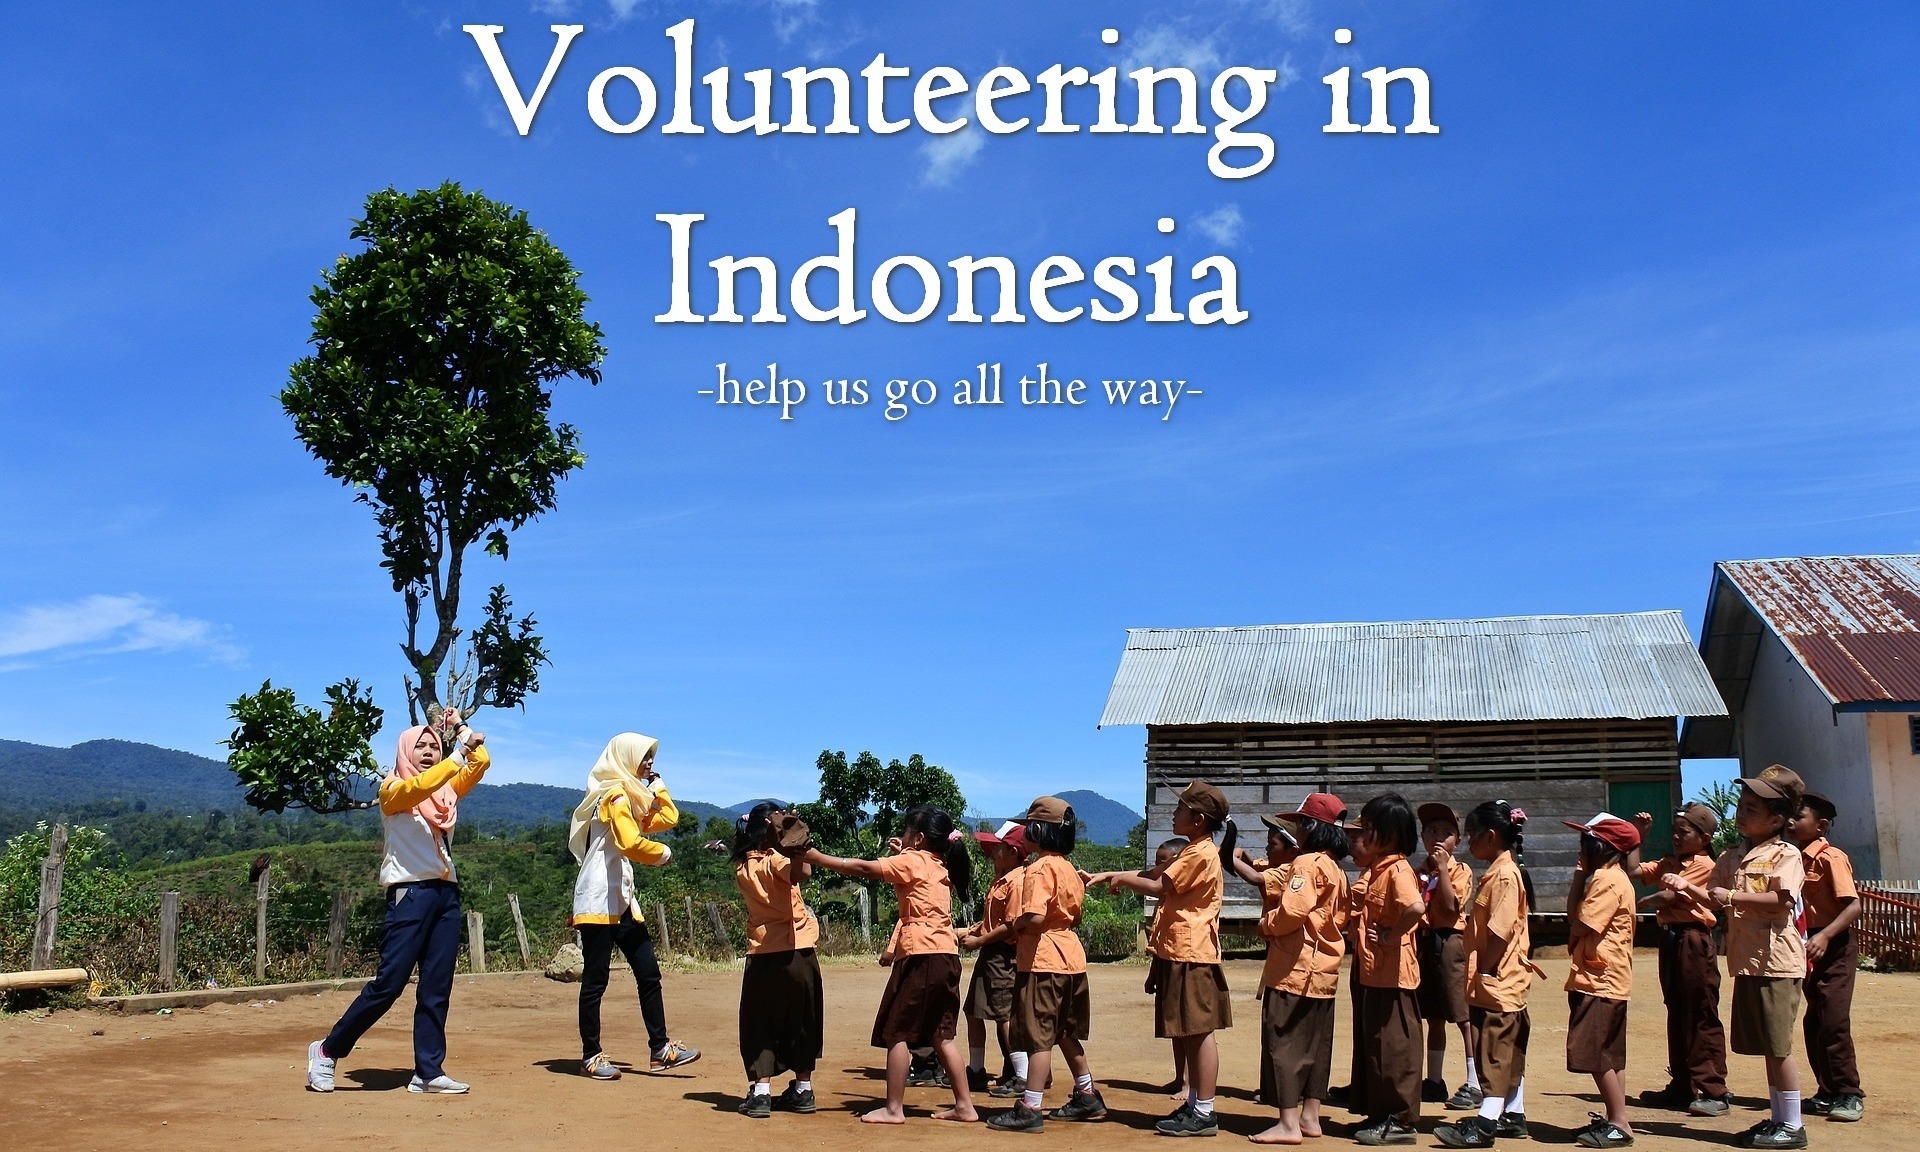 Help us bring education to Indonesia!